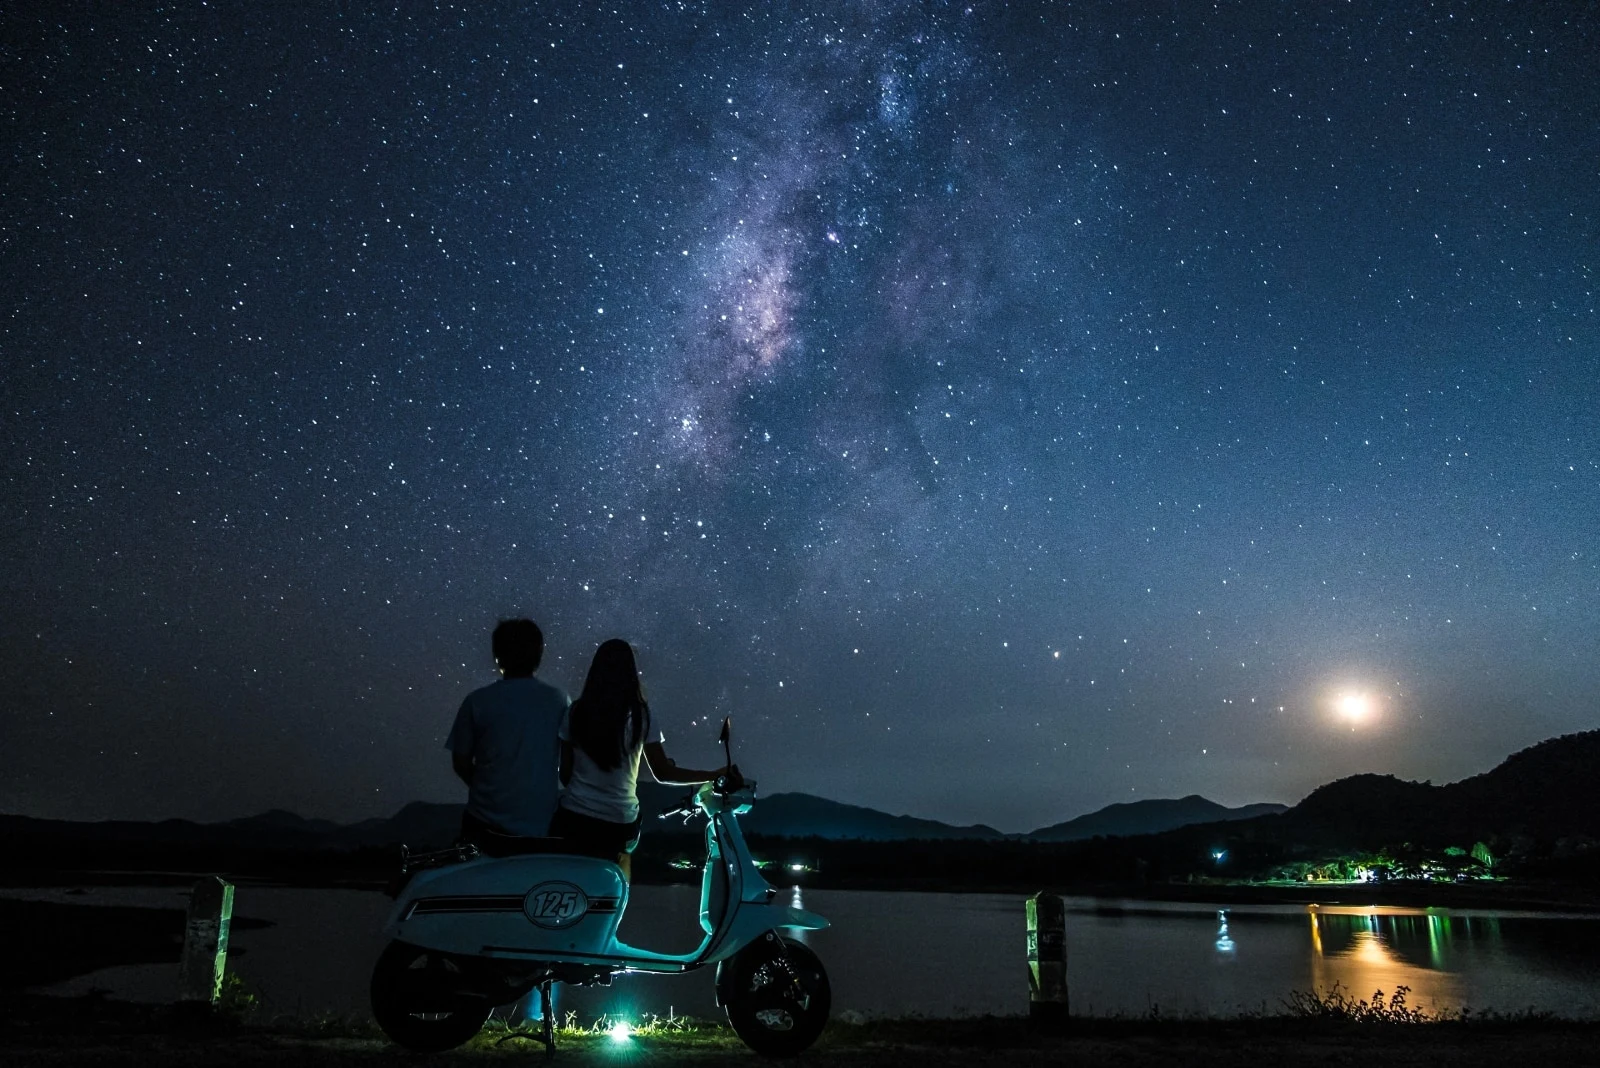 man and woman sitting on motorcycle looking at stars